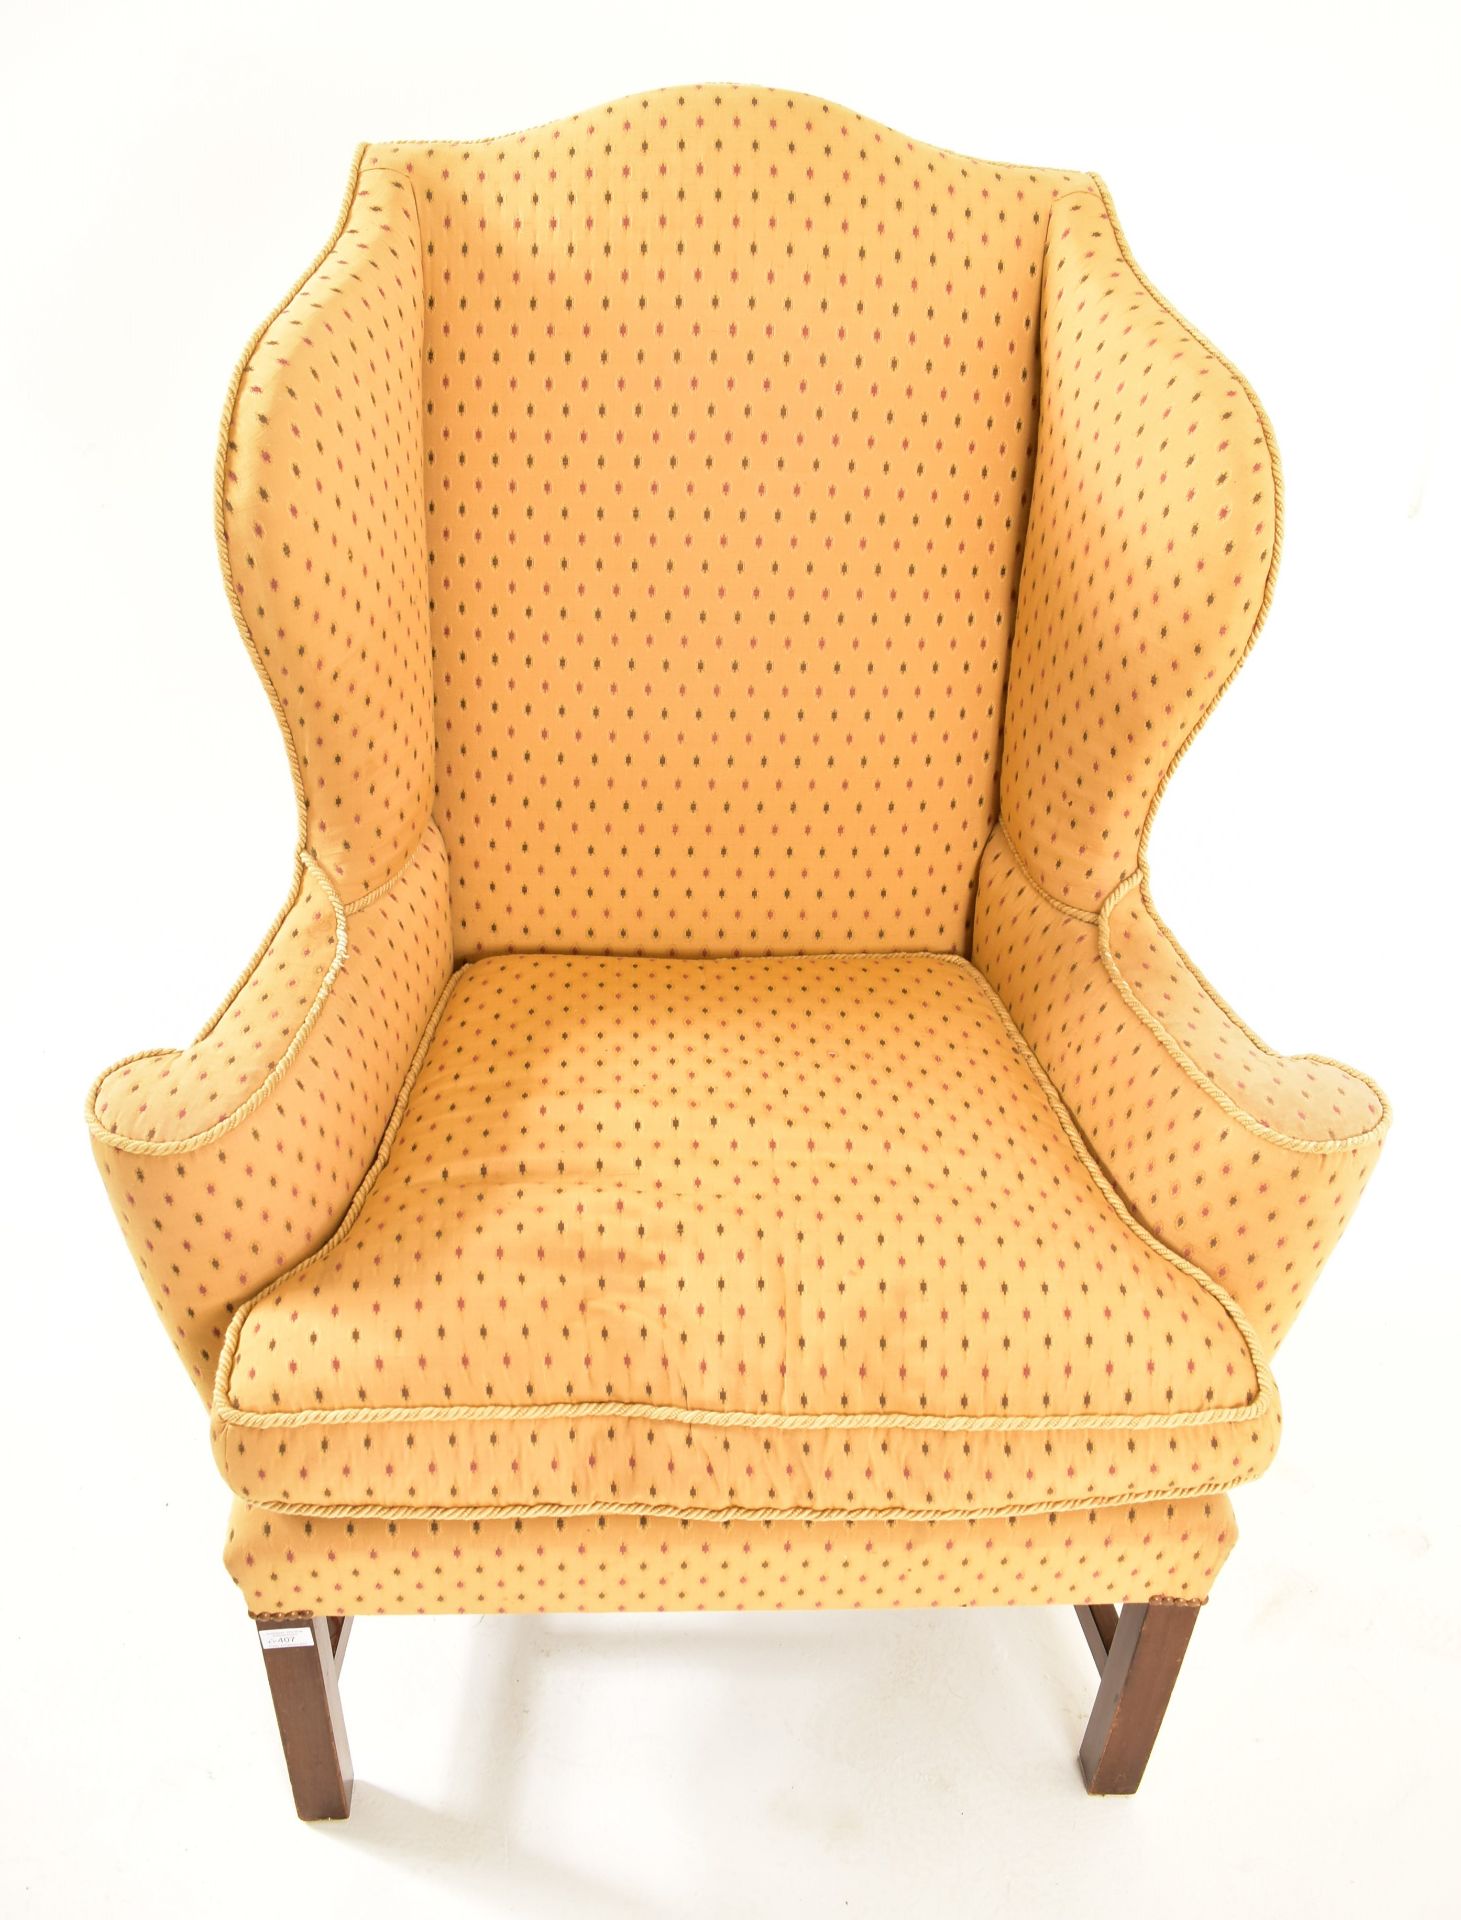 PAIR OF GEORGE III REVIVAL UPHOLSTERED WINGBACK ARMCHAIRS - Image 3 of 6